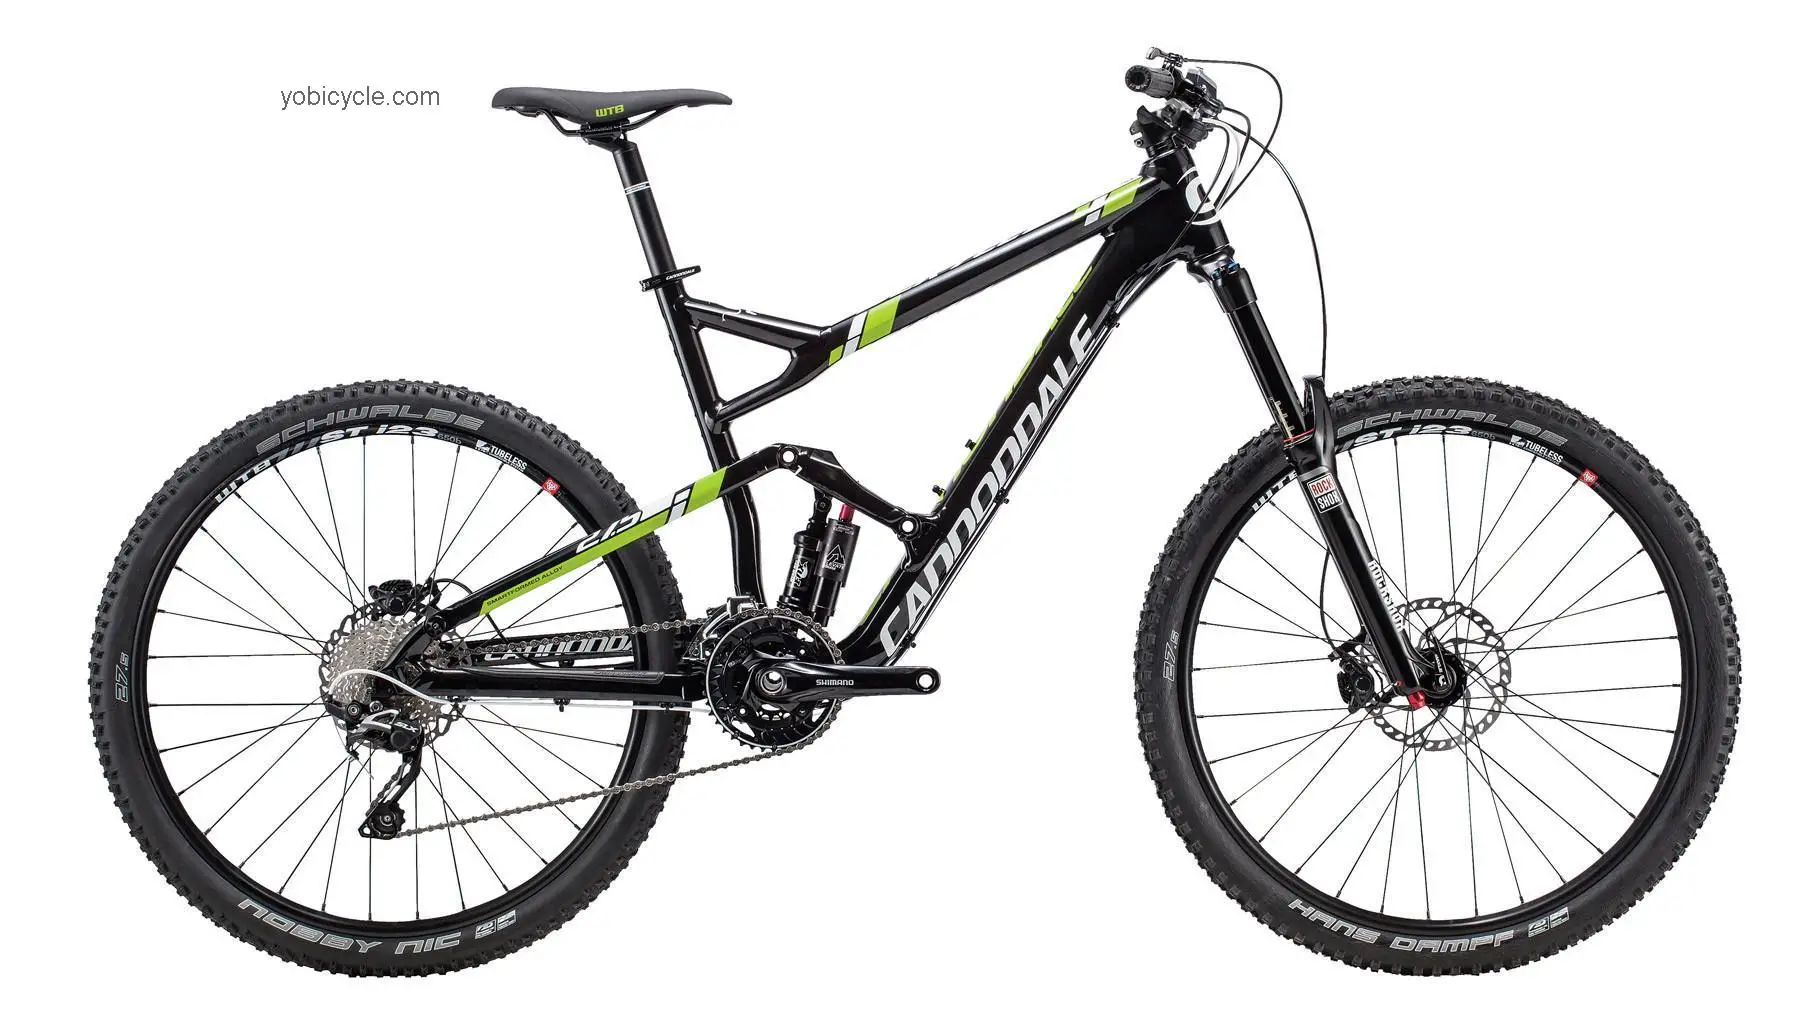 Cannondale JEKYLL 4 competitors and comparison tool online specs and performance